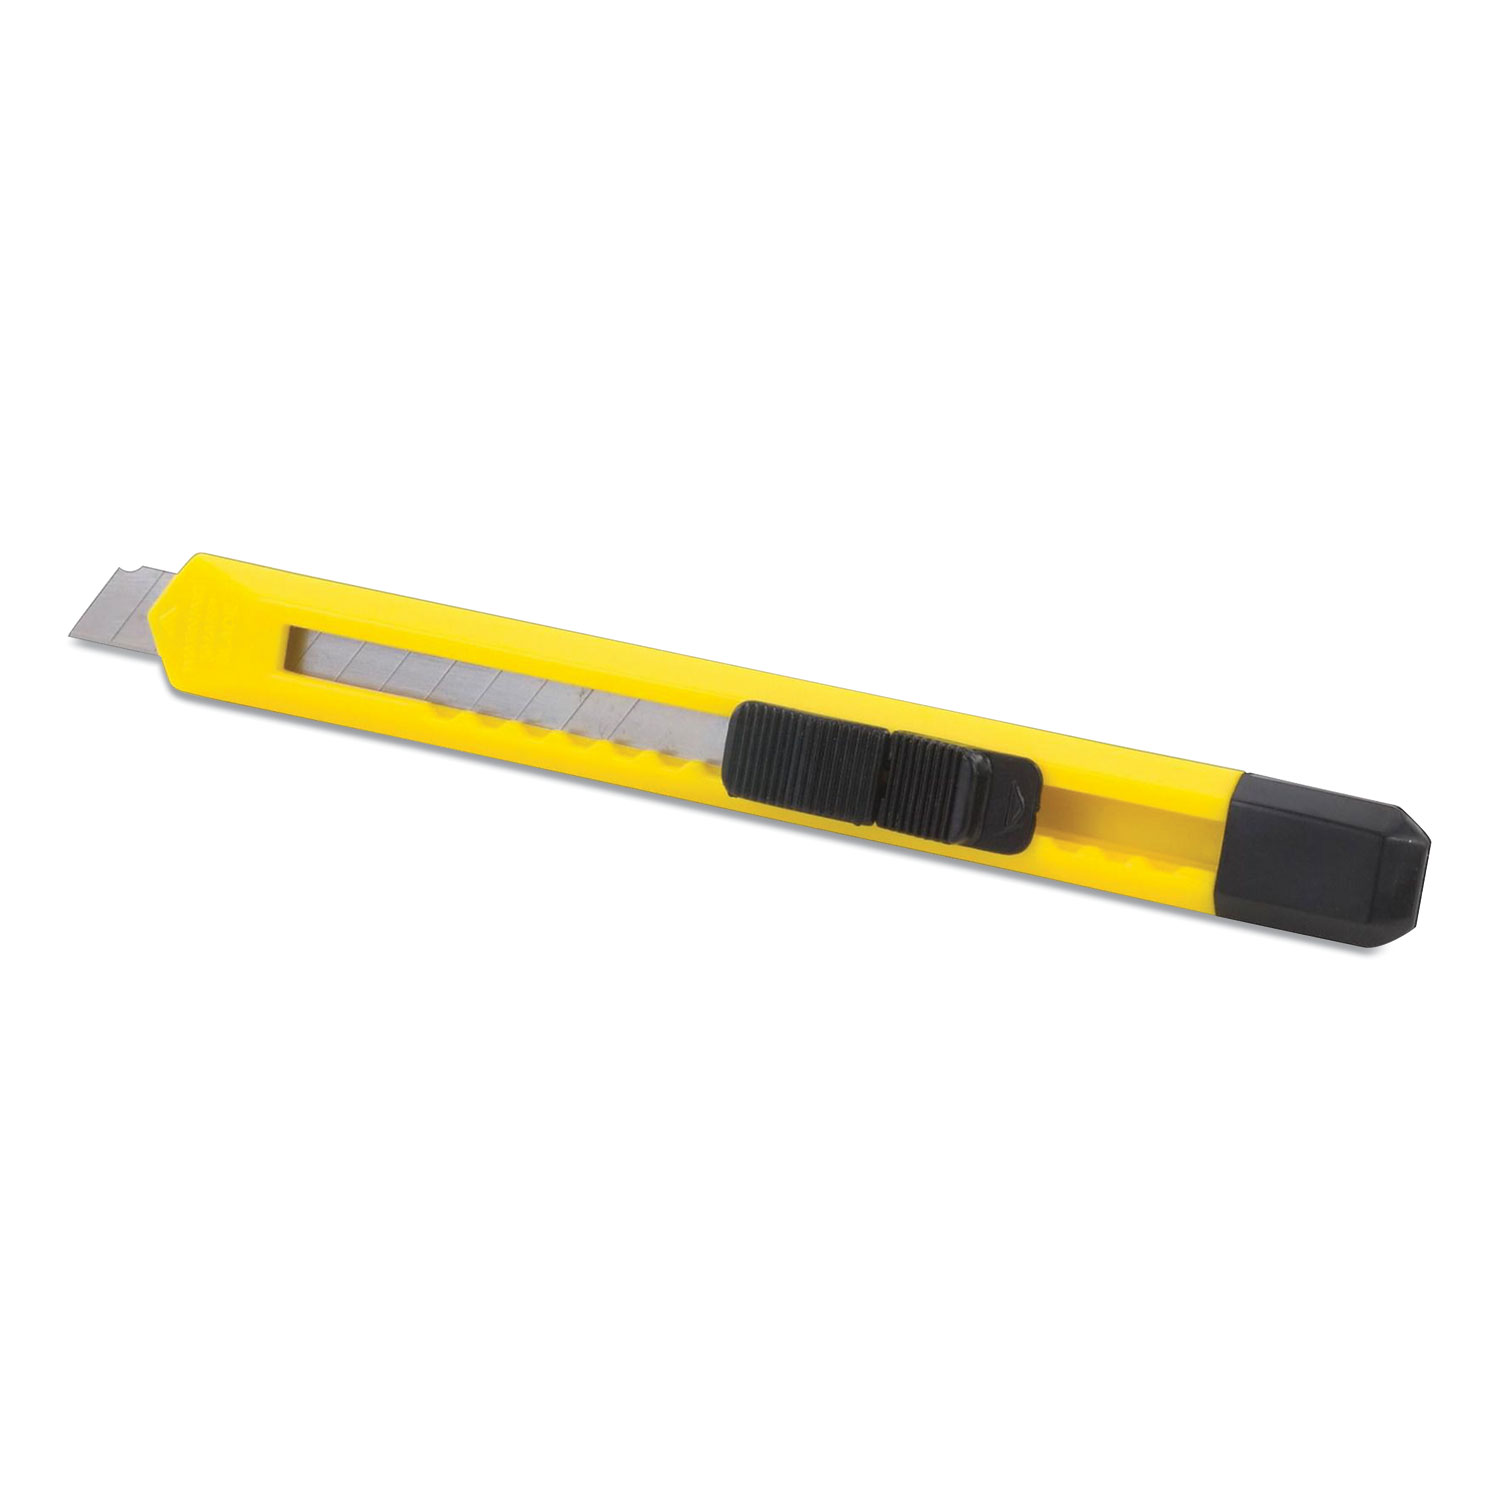  Stanley 10131P Quick Point Utility Knife, 9 mm, Yellow/Black (SQN565328) 